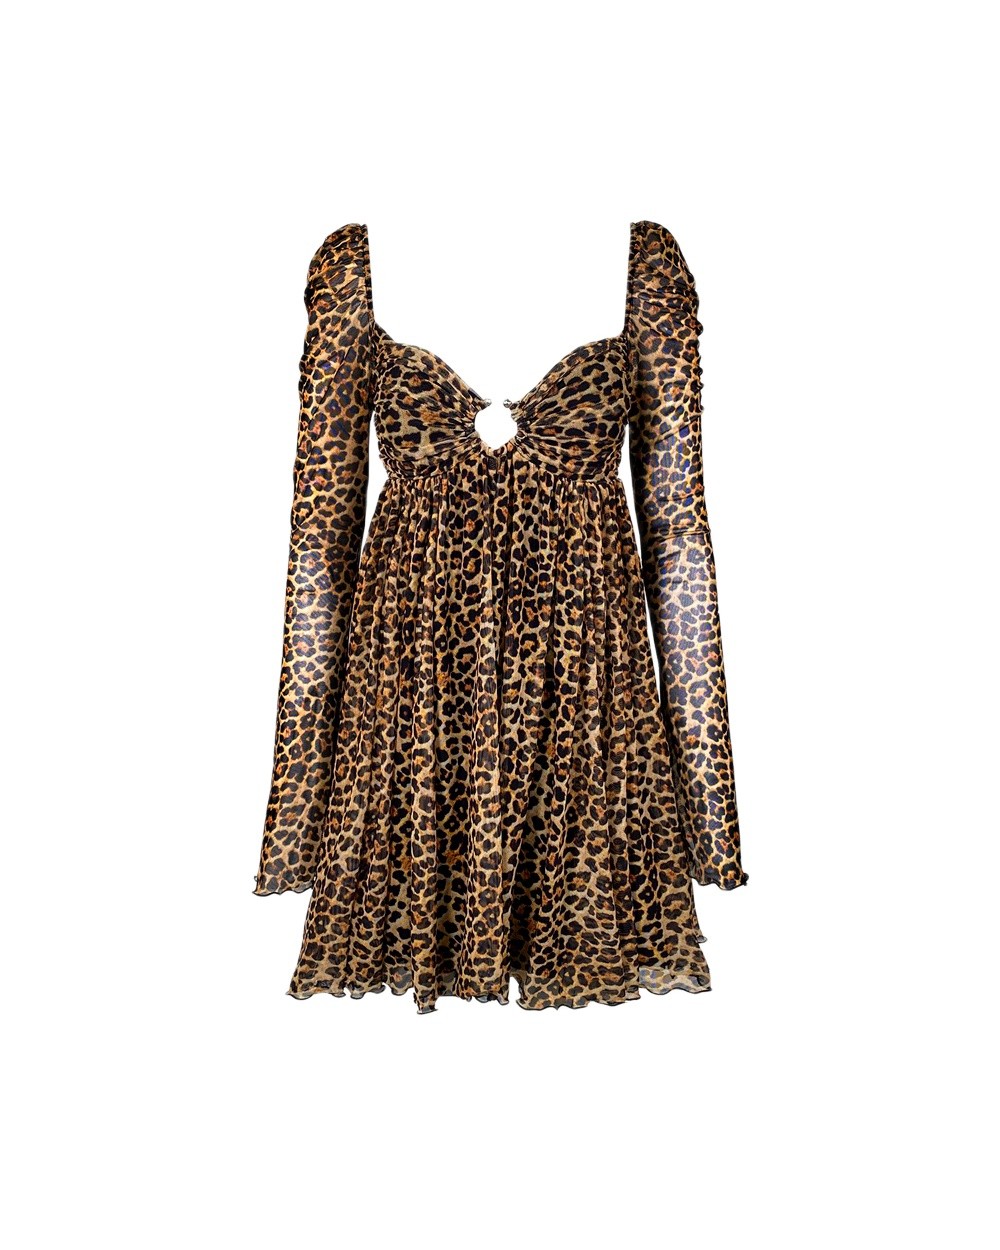 Leopard Print V-Neck Dress with Long Sleeves